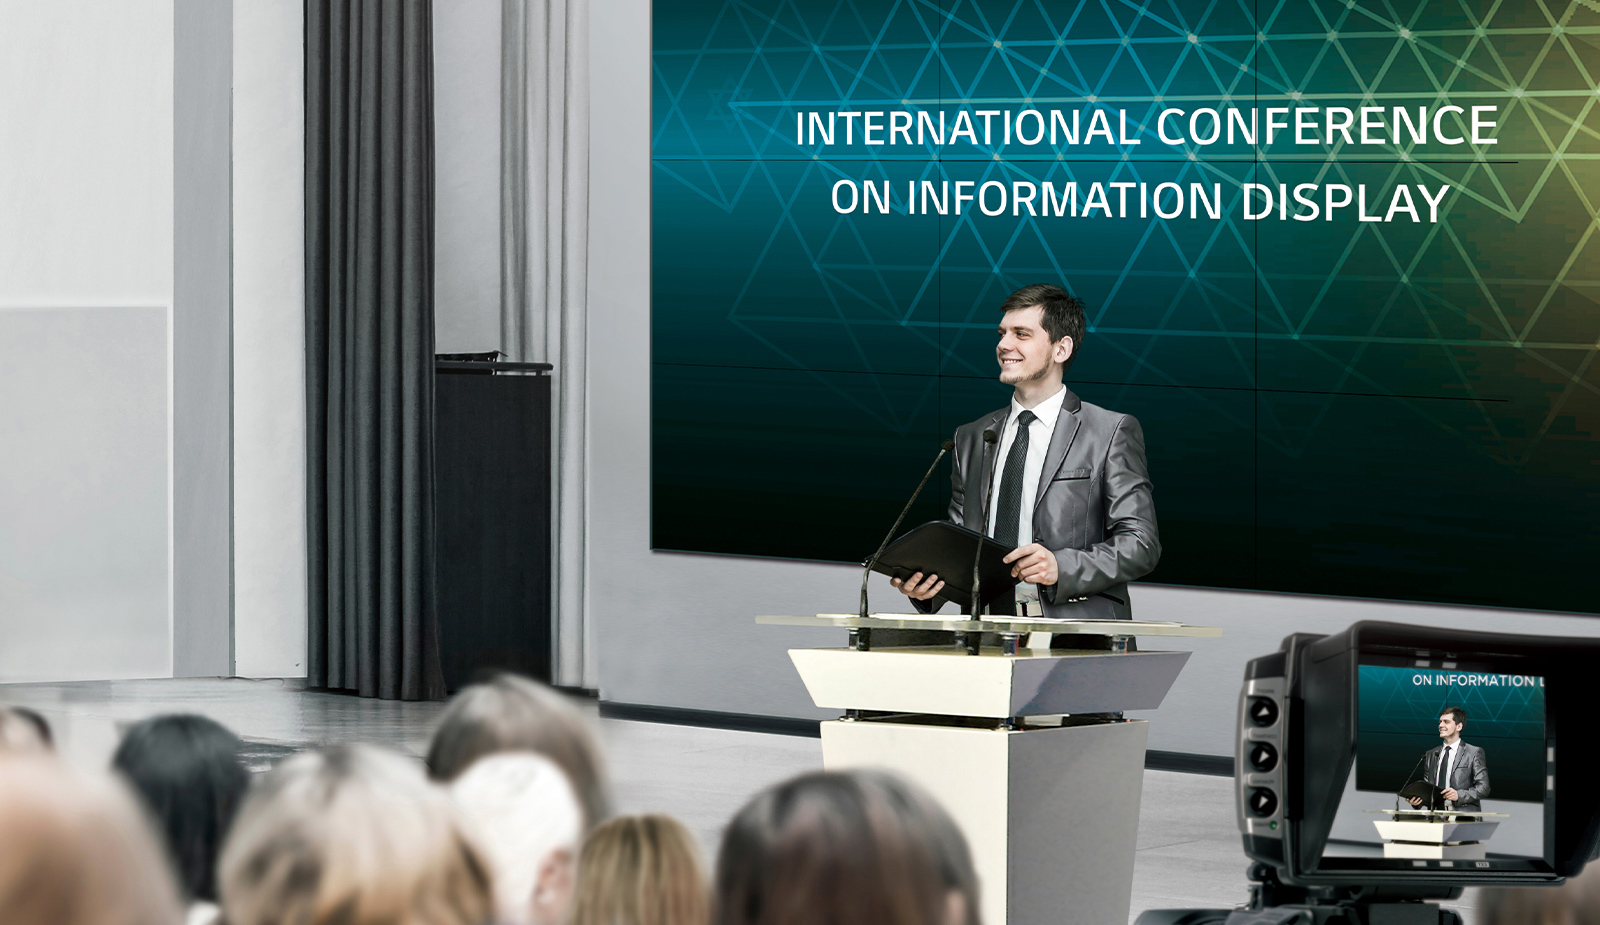 A large video wall is installed in the conference room and a man is holding the conference in front of many people.